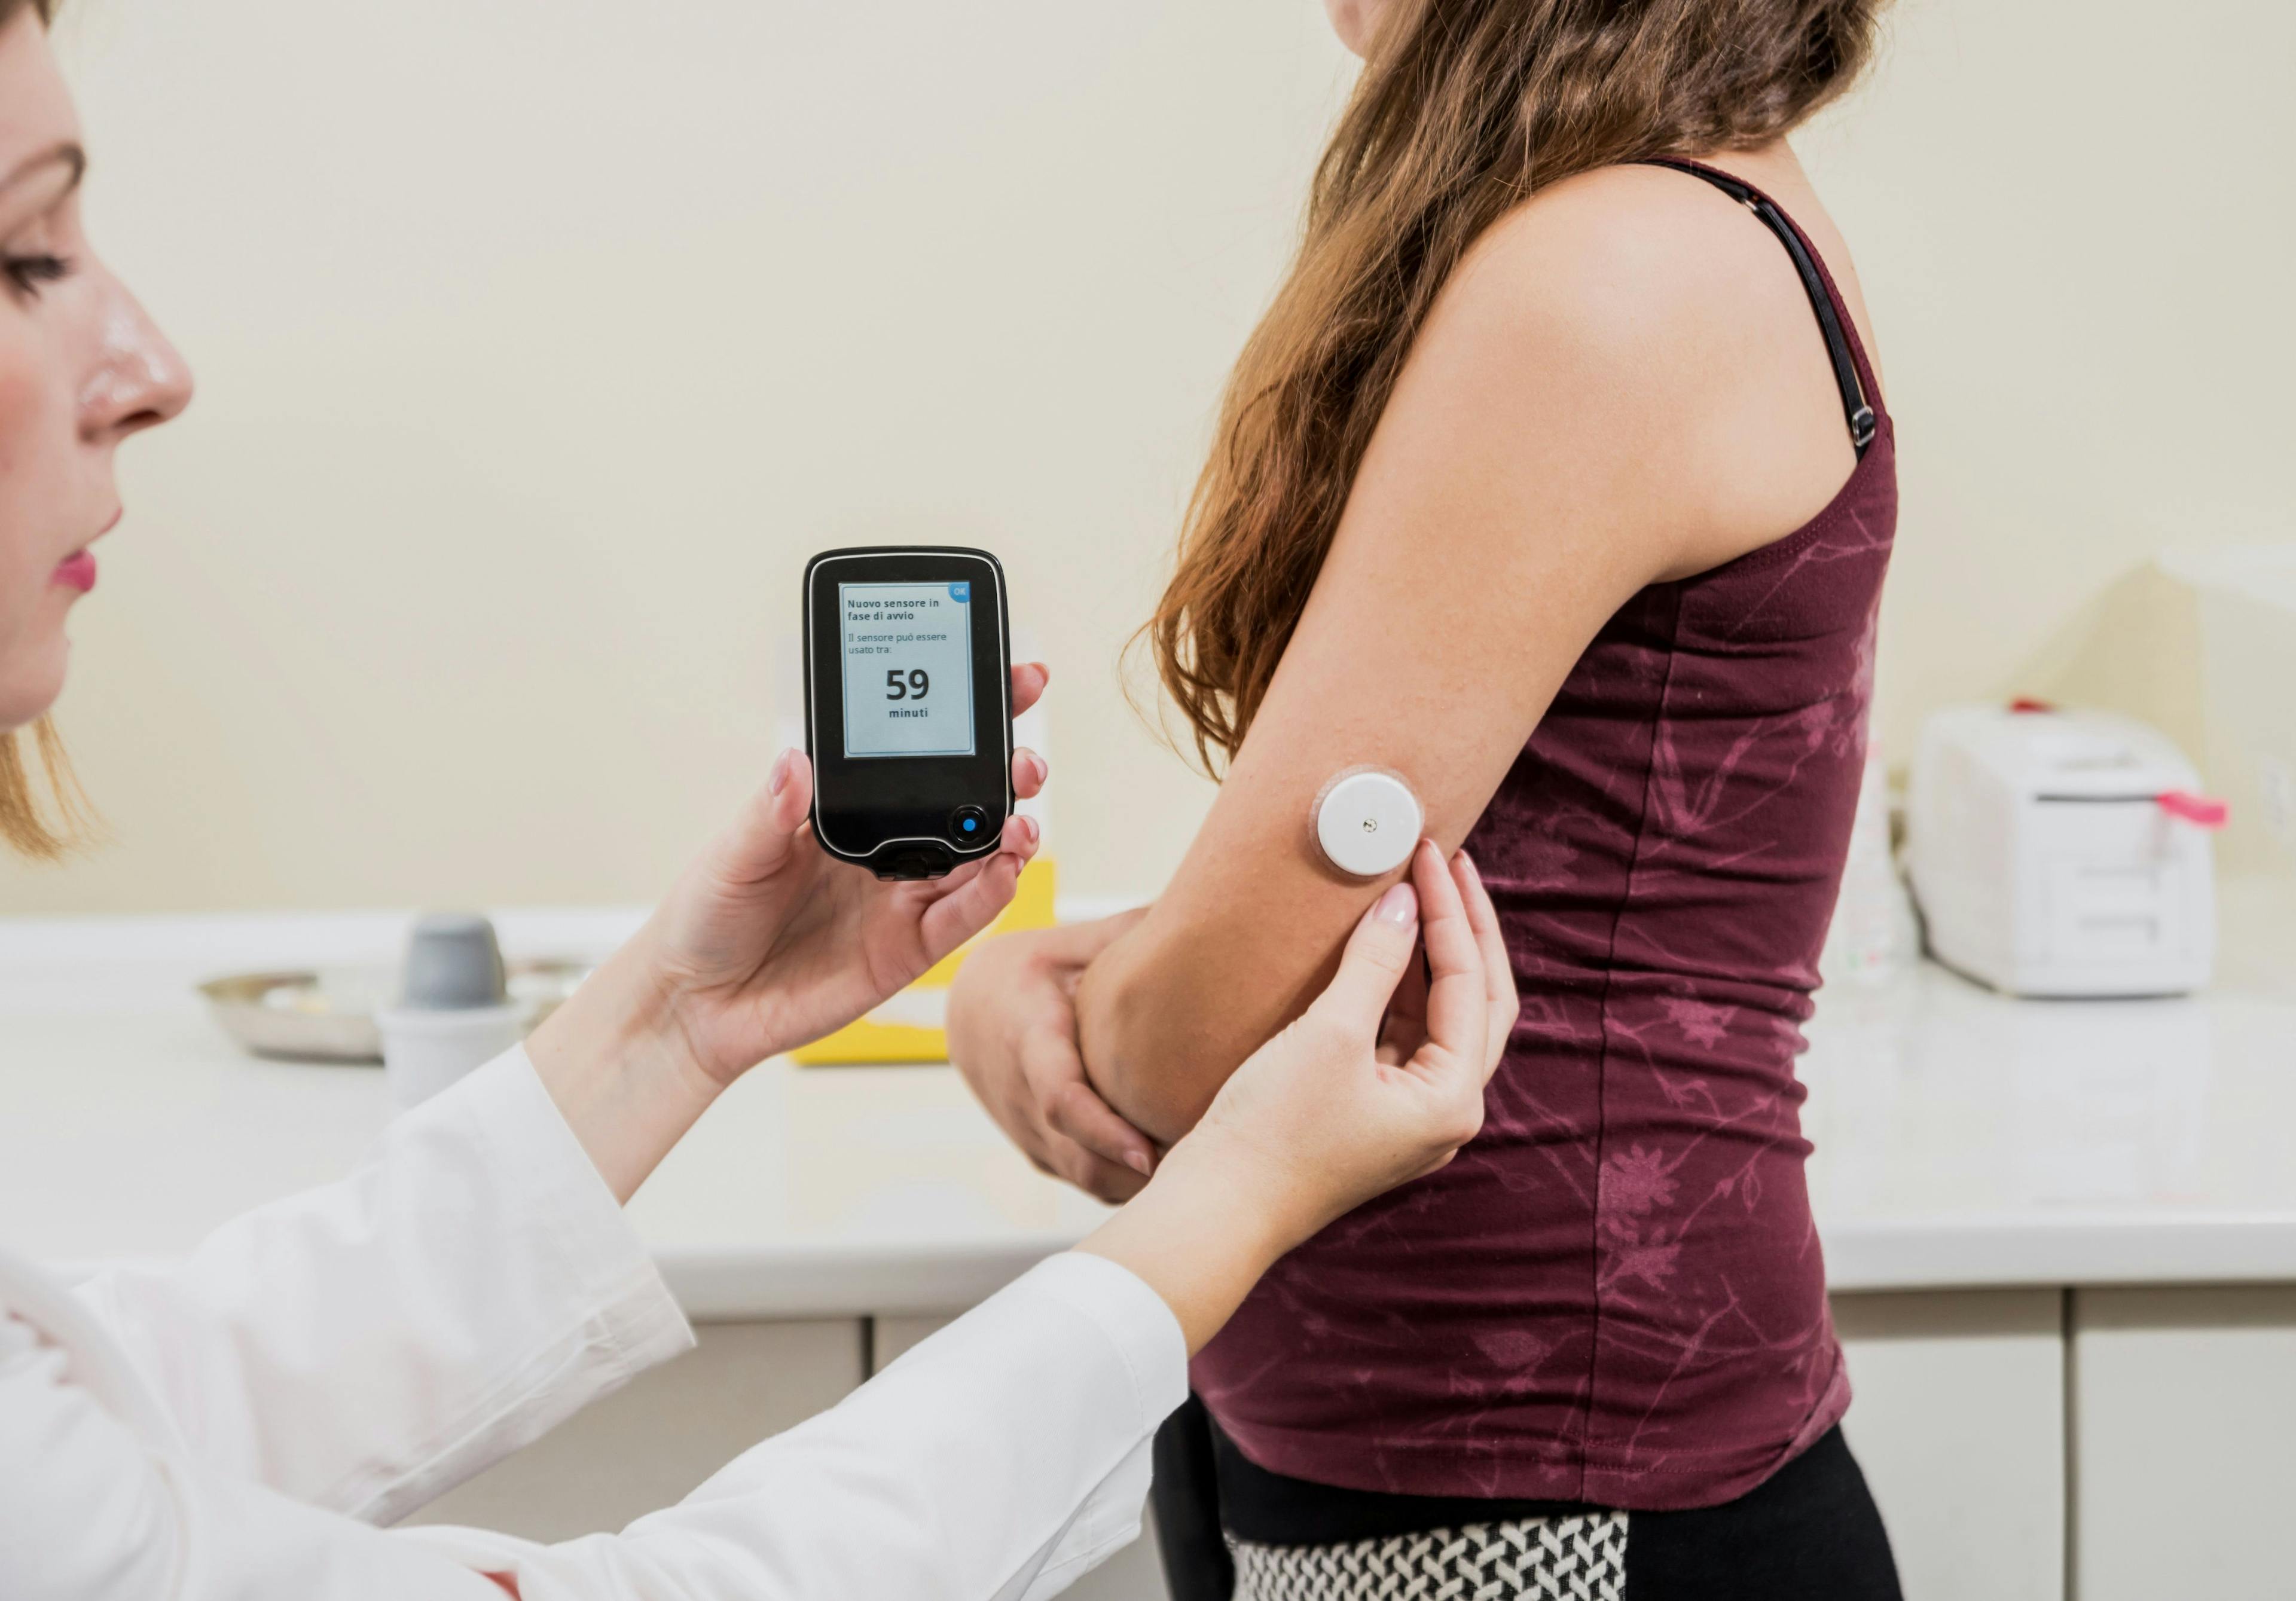 Community Pharmacist-Led CGM Programs Can Boost Clinic Revenue While Helping Patients